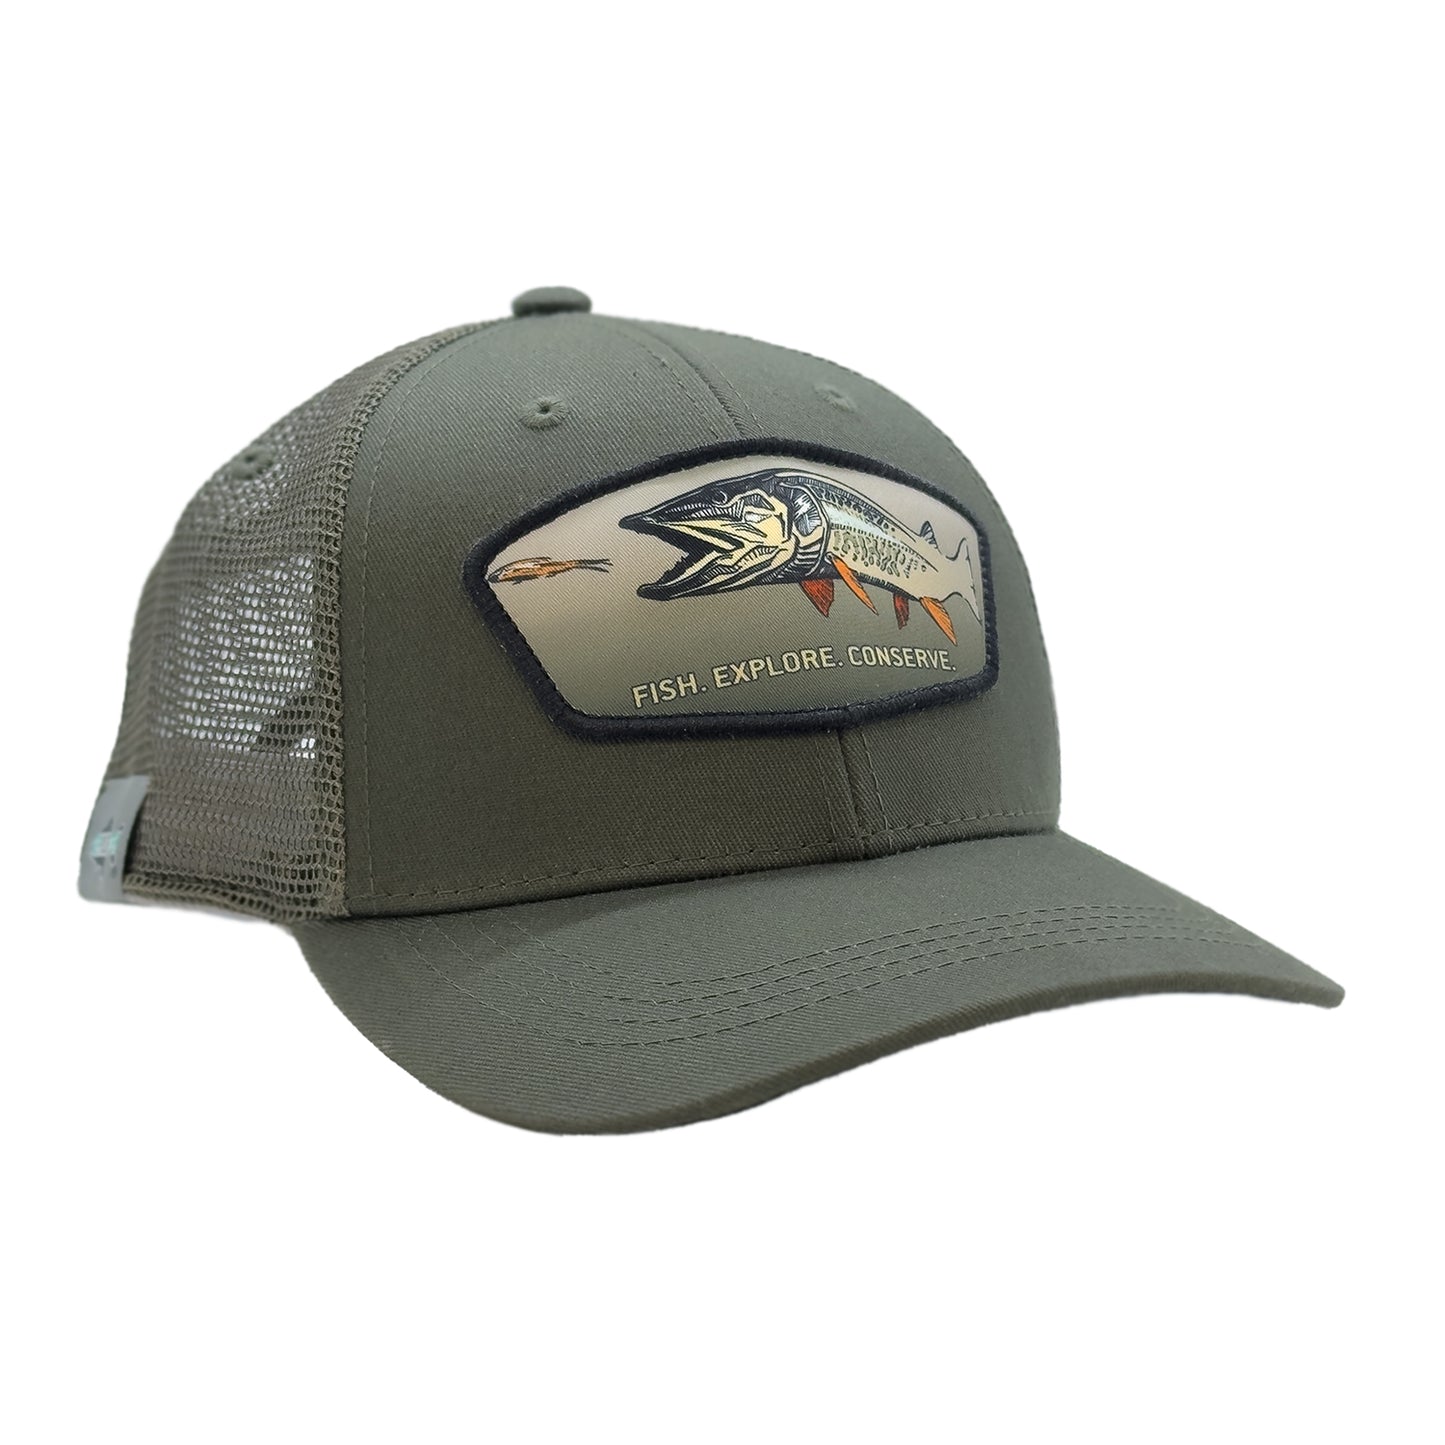 A green hat with mesh back featuring a patch with a musky chasing a fly that says fish explore conserve.